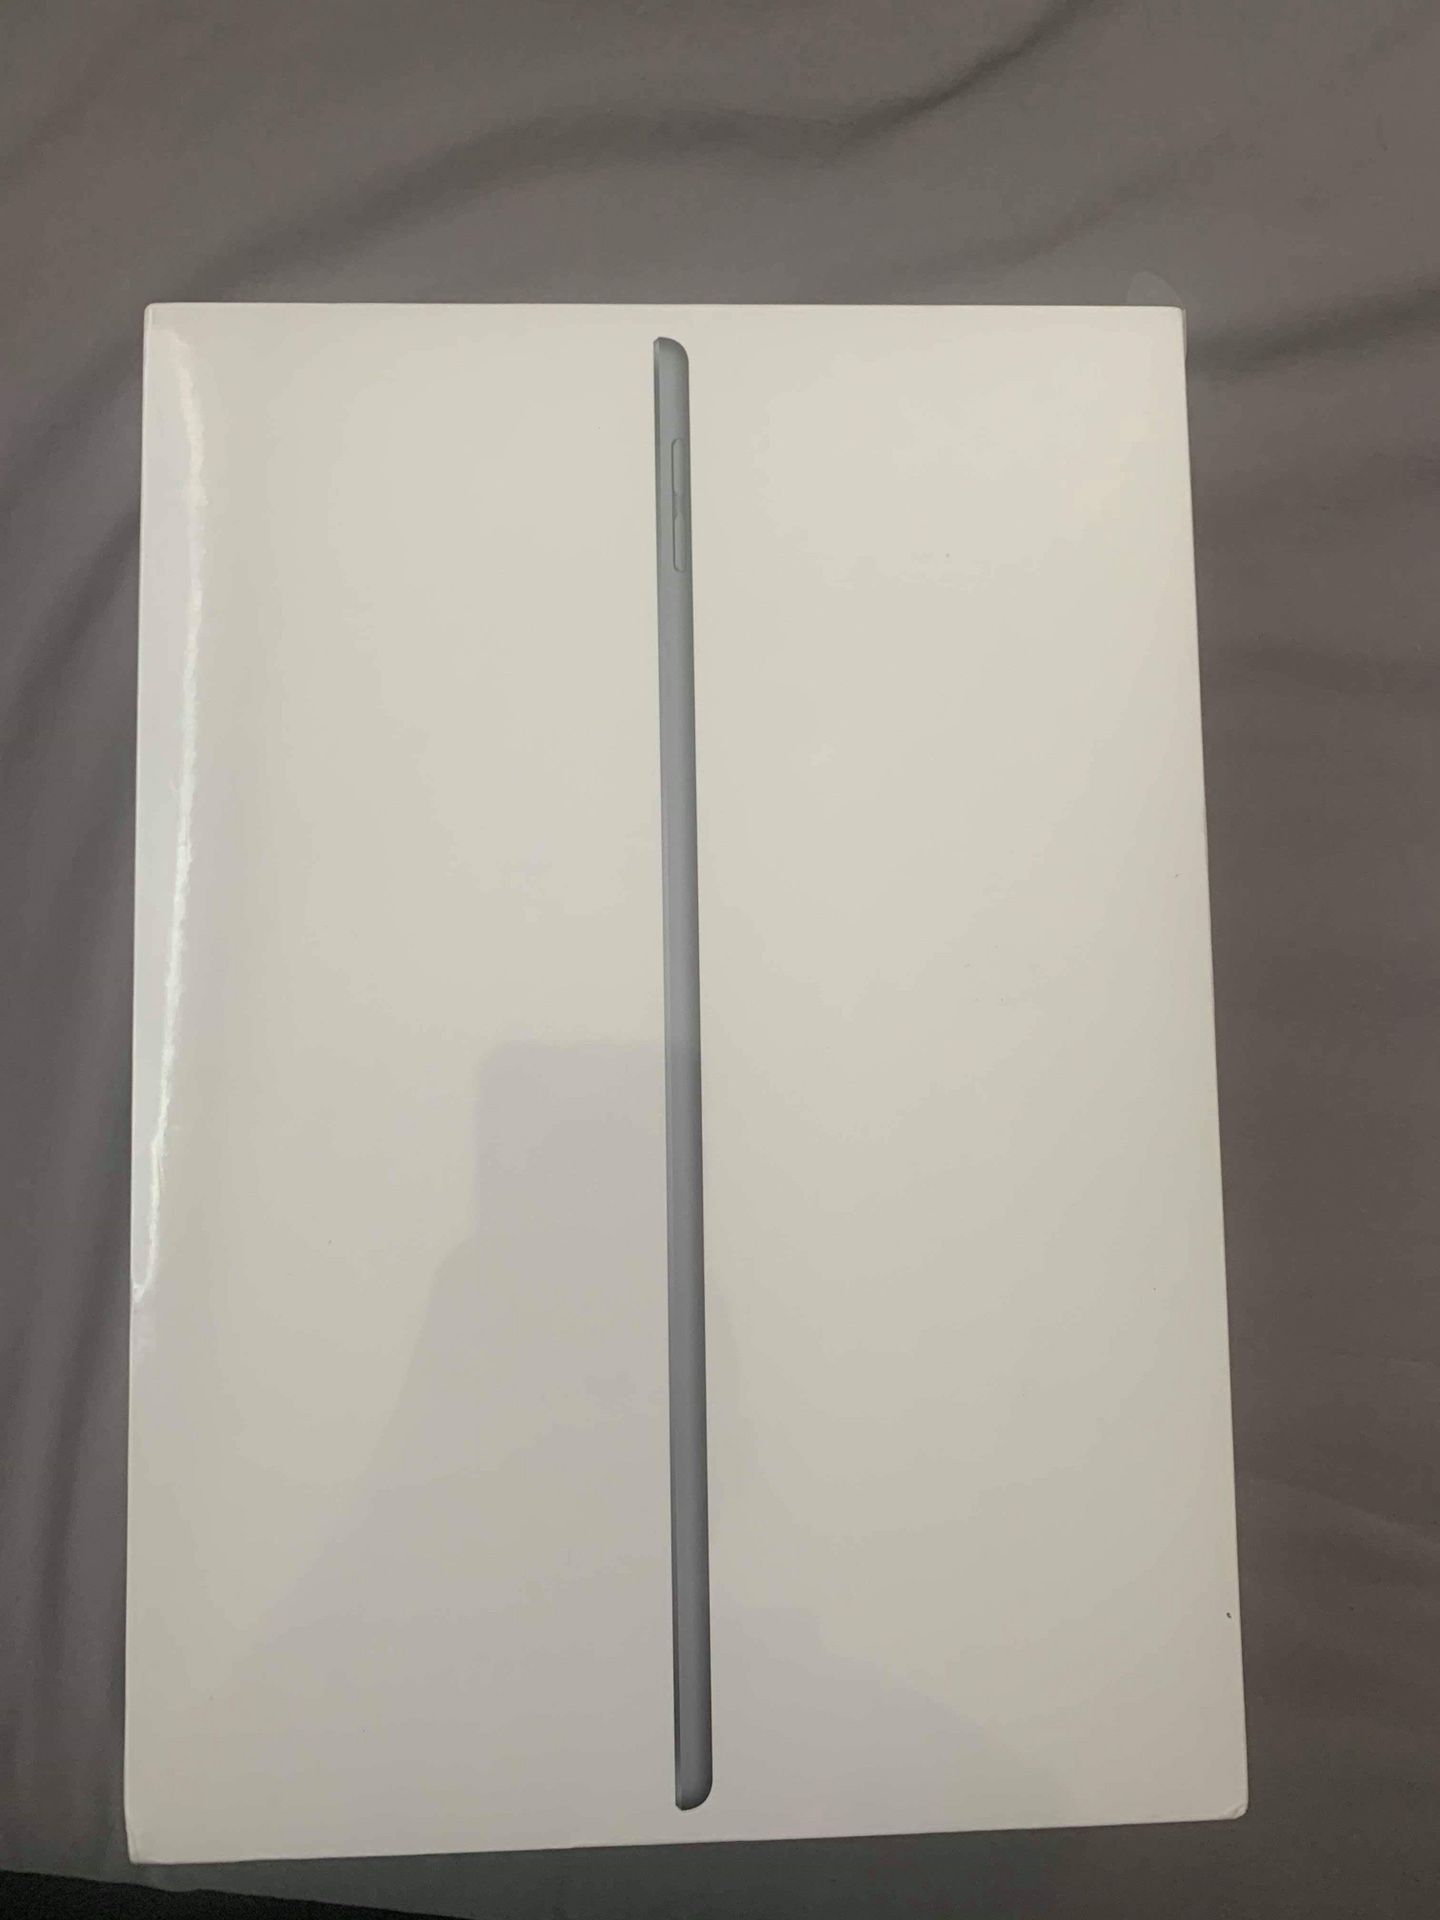 Ipad air 256g wifi only new